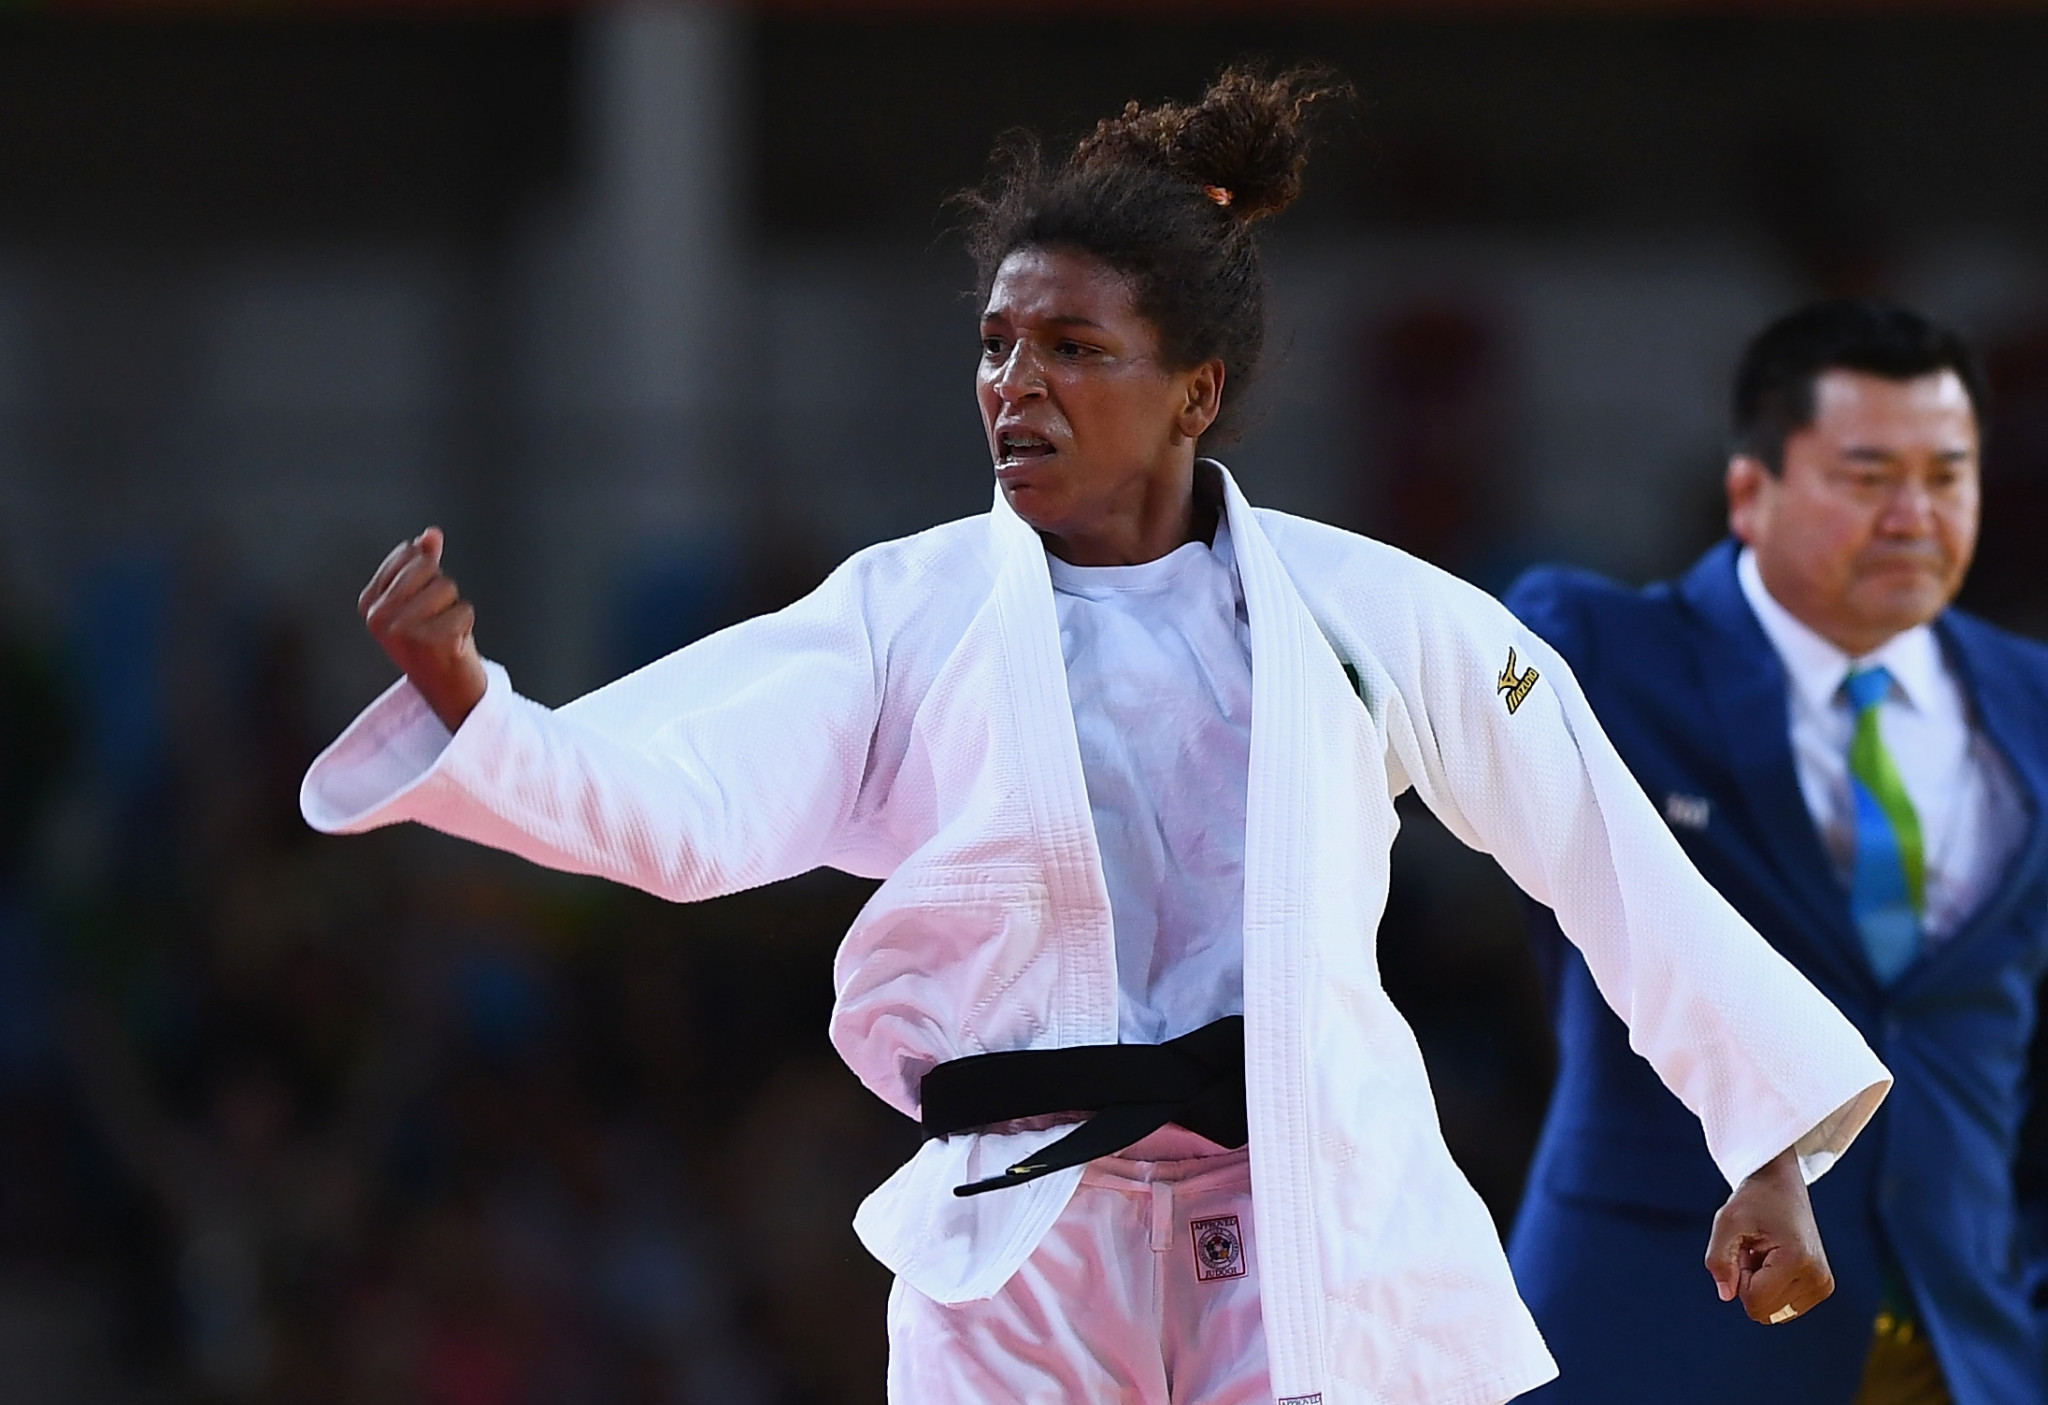 Olympic judo gold medallist poised for CAS appeal against two-year doping ban